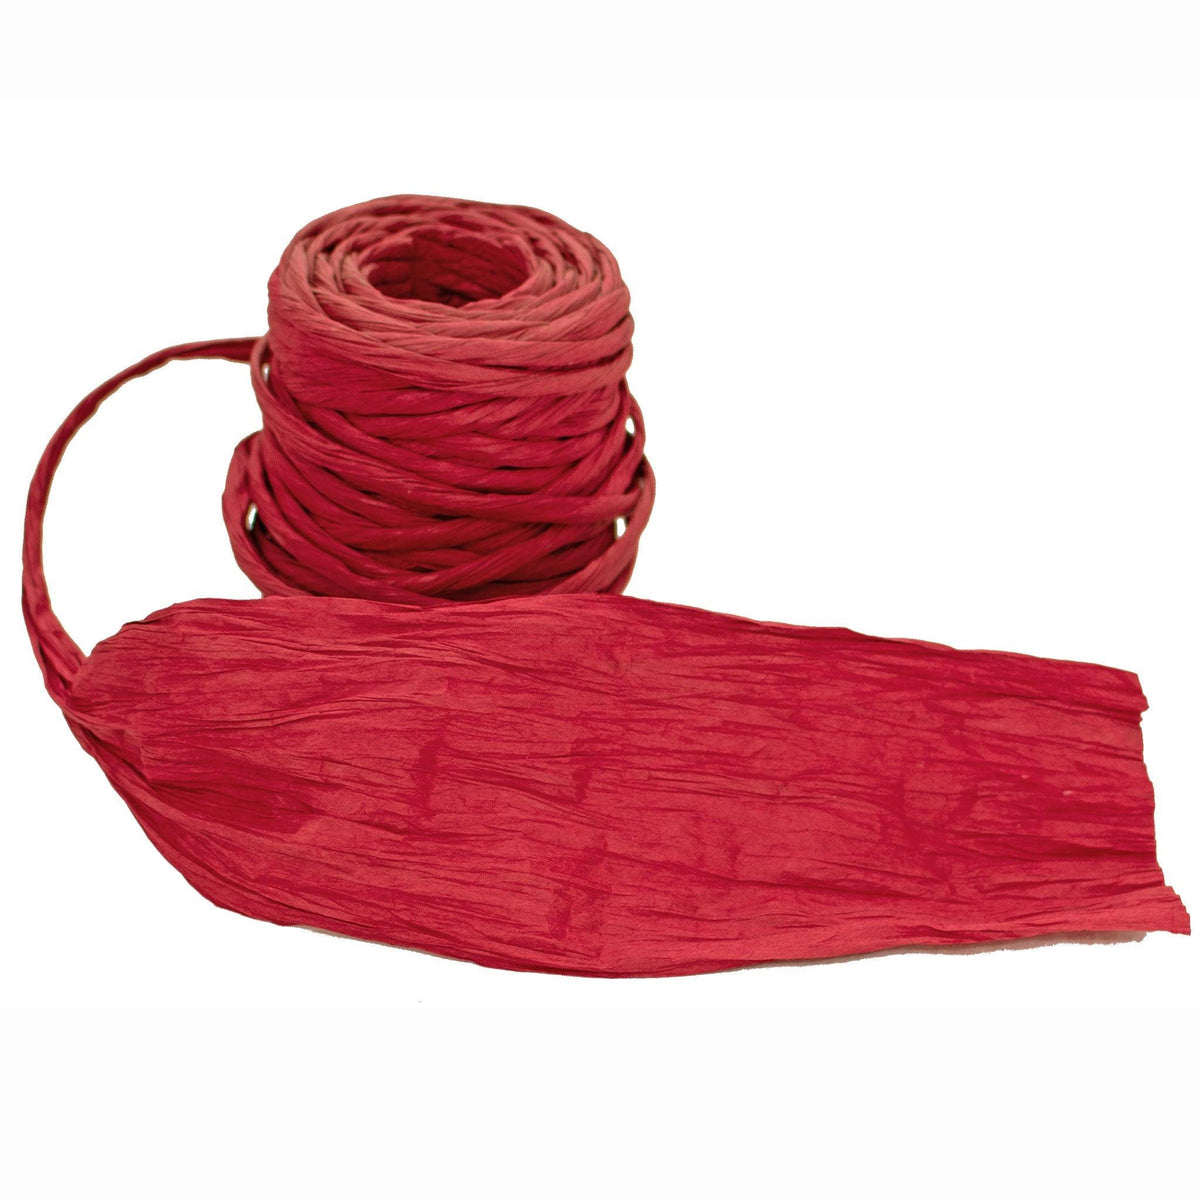 Lee Display's Red Raffia paper comes wrapped together in a rope and can be unfolded for packing.